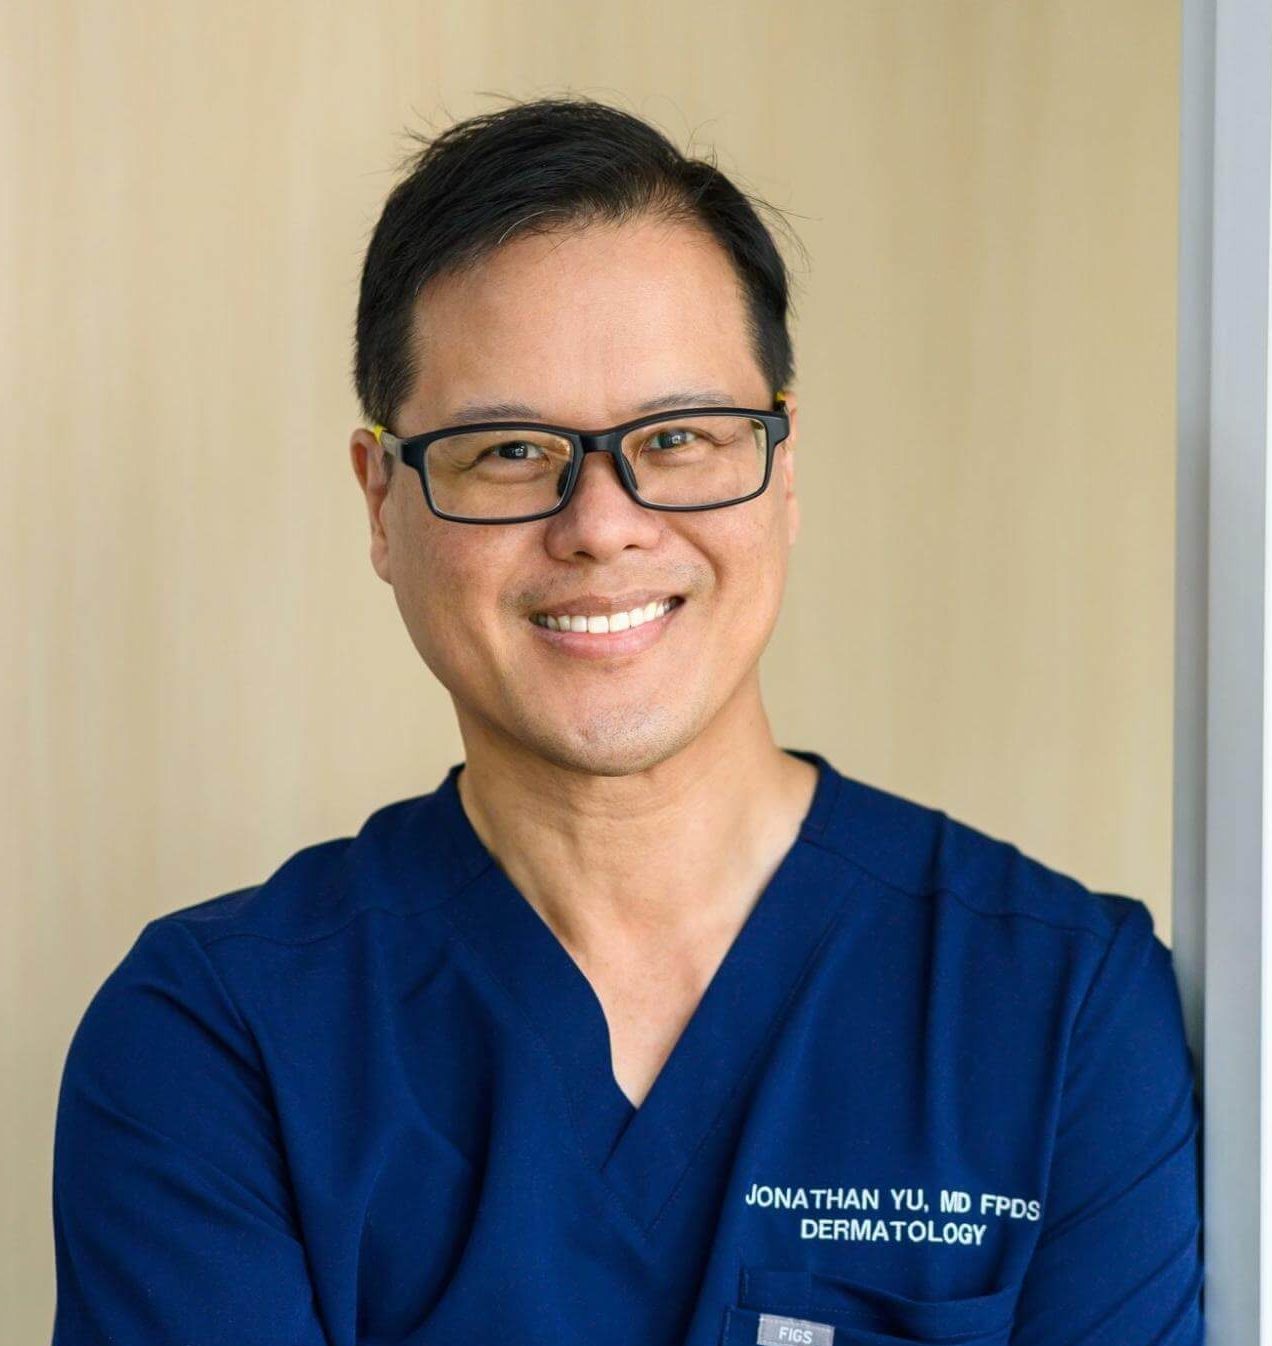 Dr Jon Yu - a board-certified dermatologist and aesthetic expert|